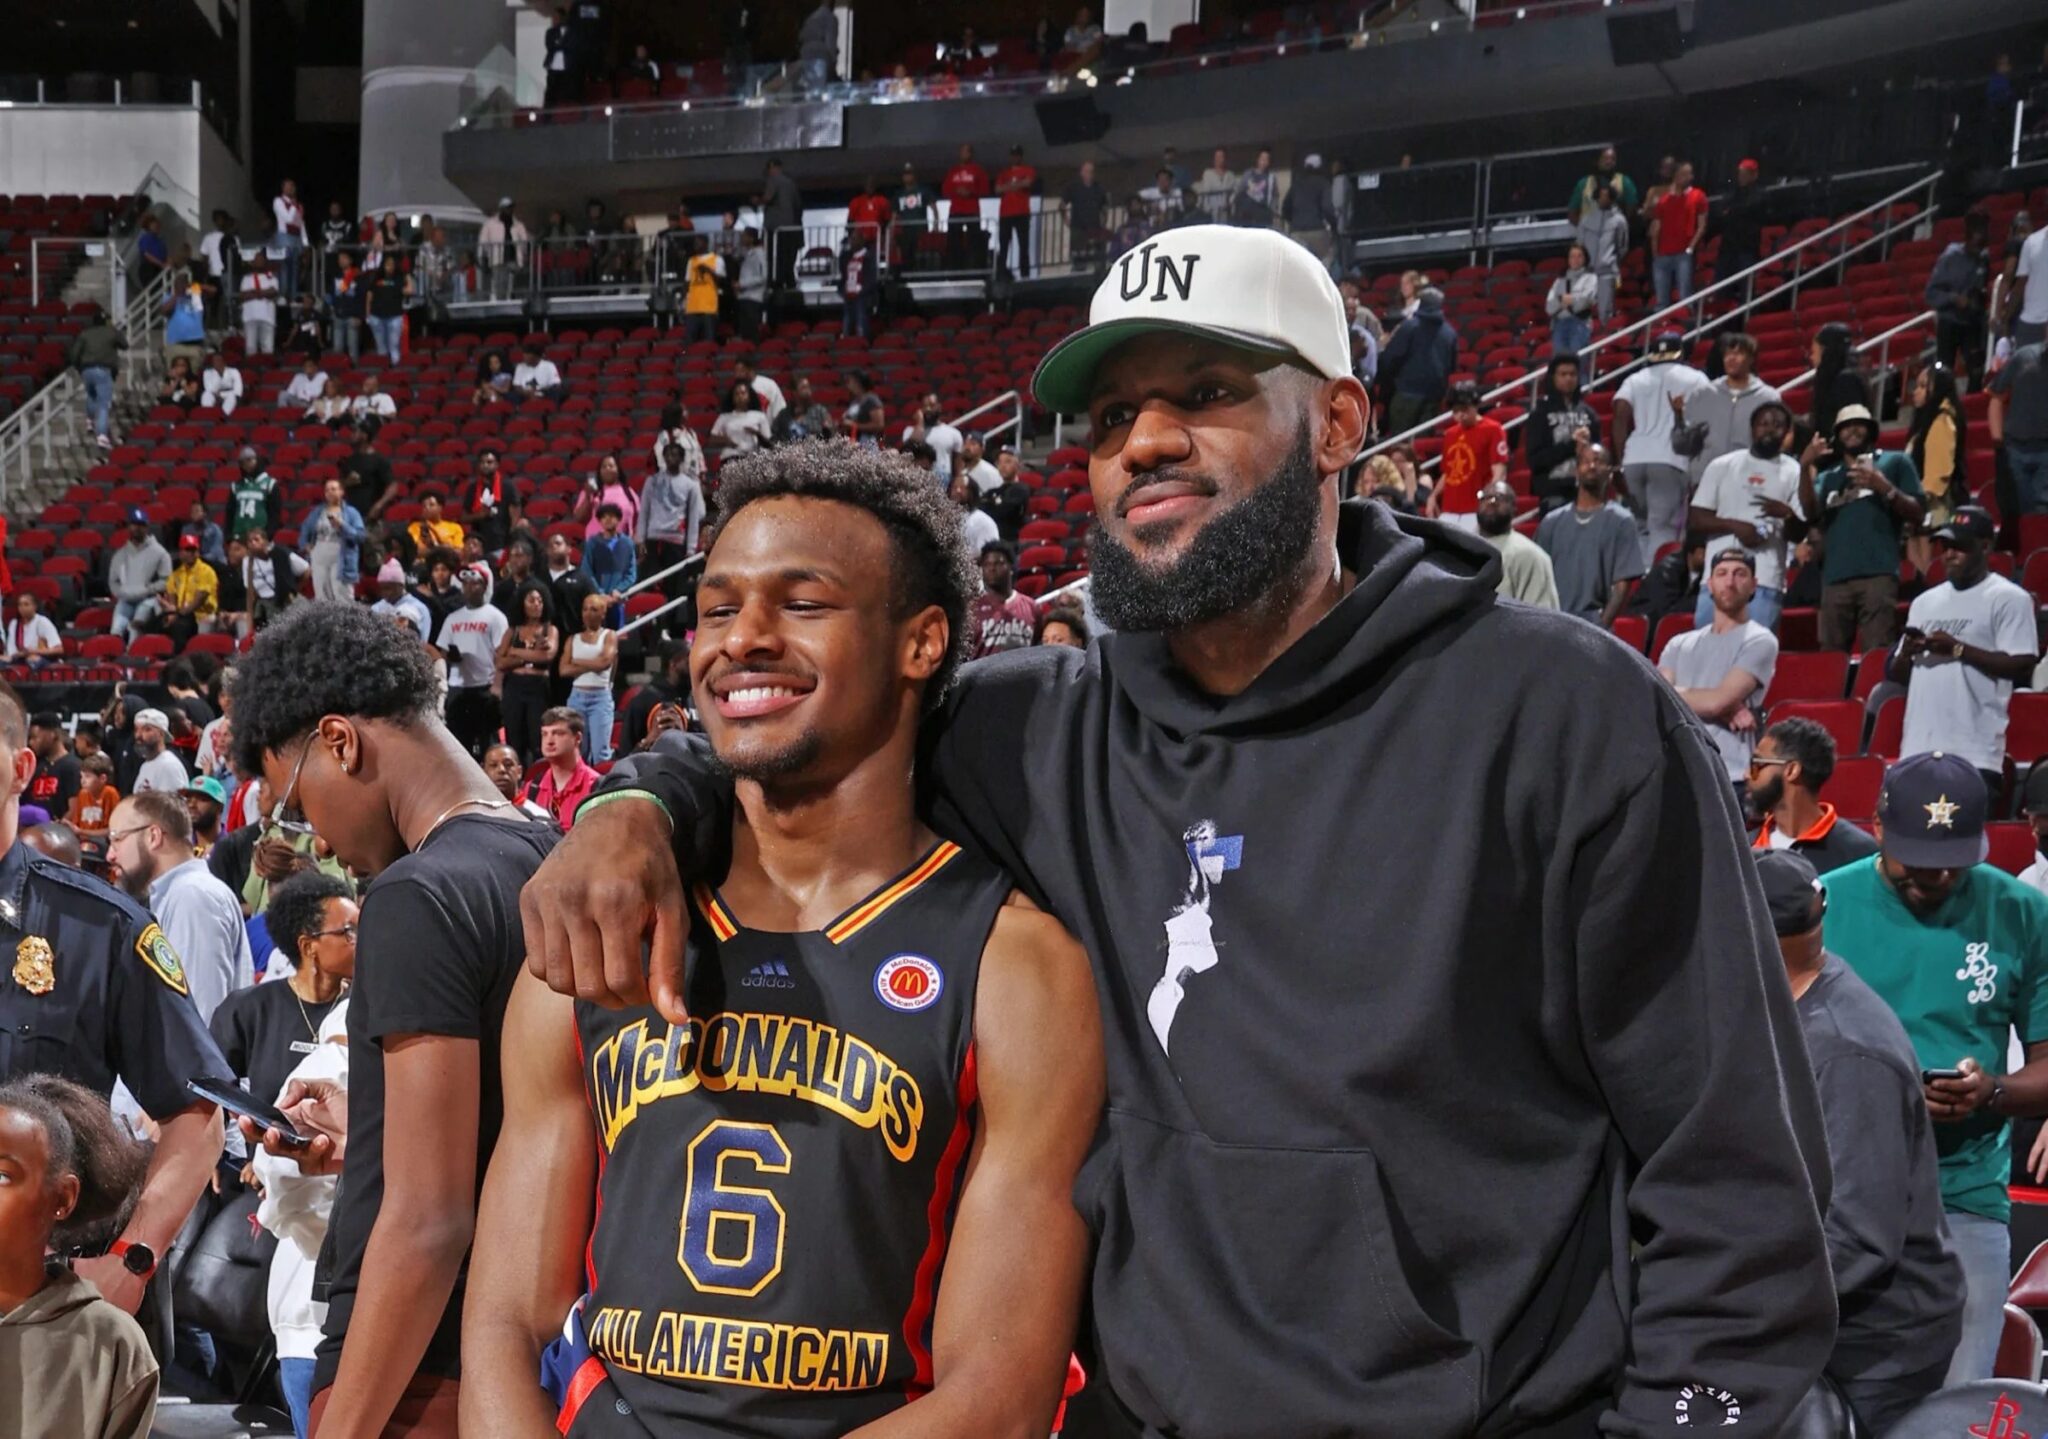 Bryce Is as Tall as Bronny Now?!': Fans Can't Get Over How Tall